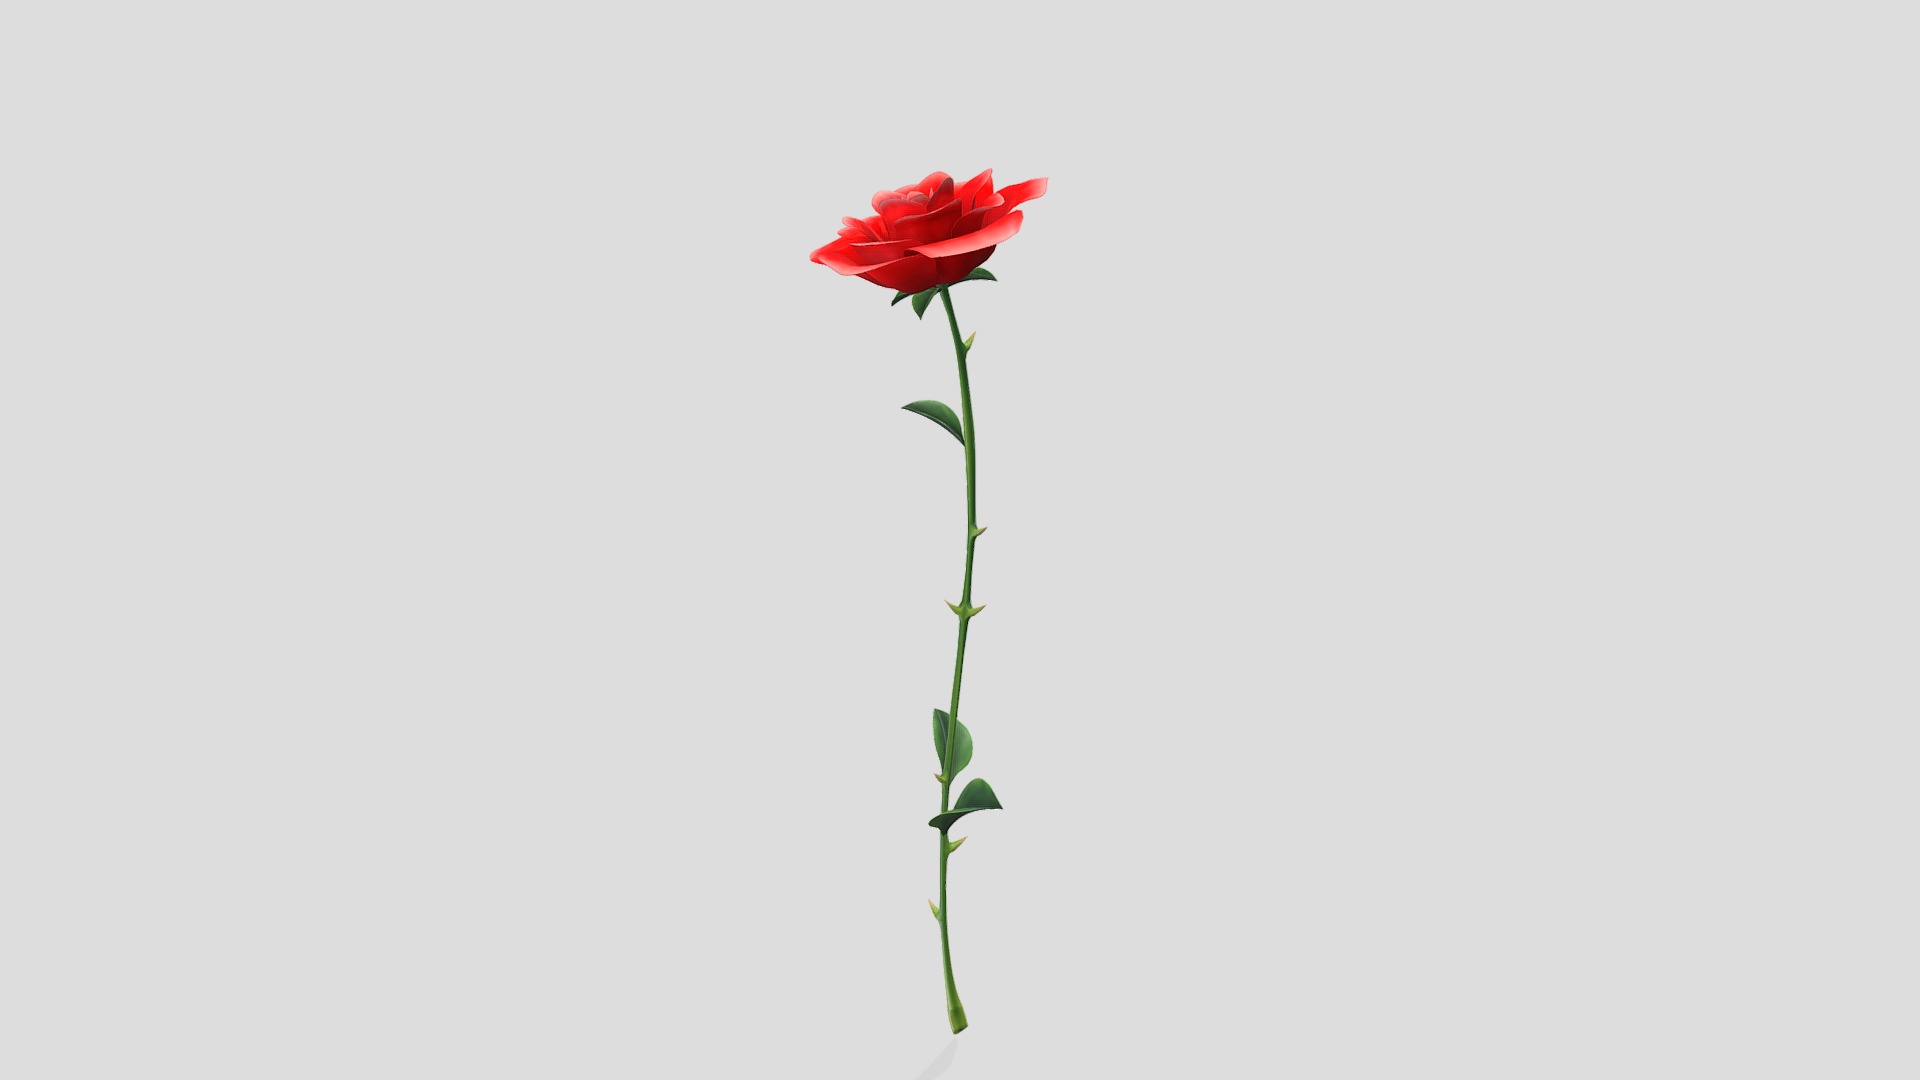 3D model Open Bud Single Red Rose - This is a 3D model of the Open Bud Single Red Rose. The 3D model is about a red rose with green leaves.